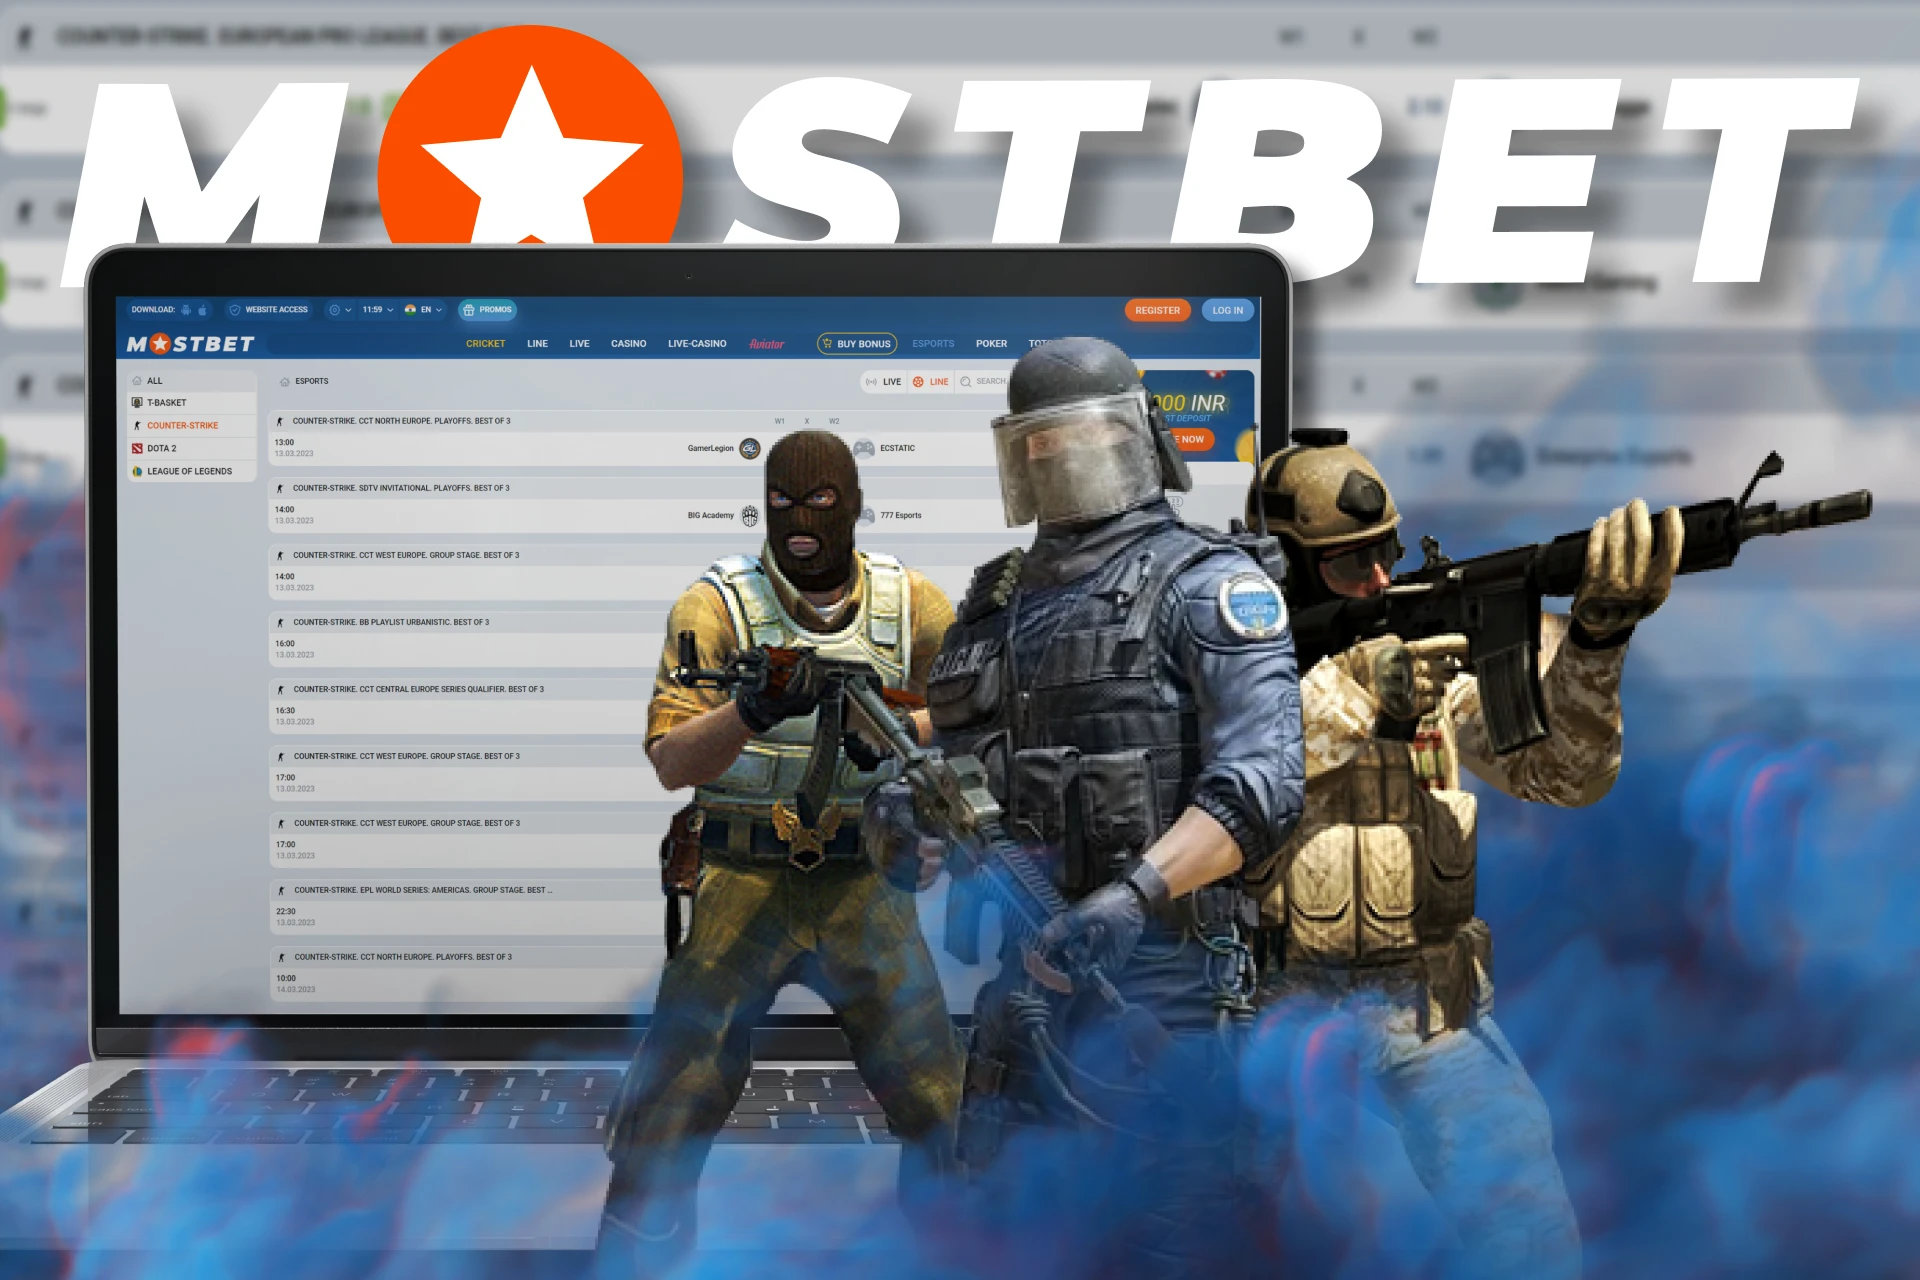 Bet on various CS:GO tournaments at Mostbet.